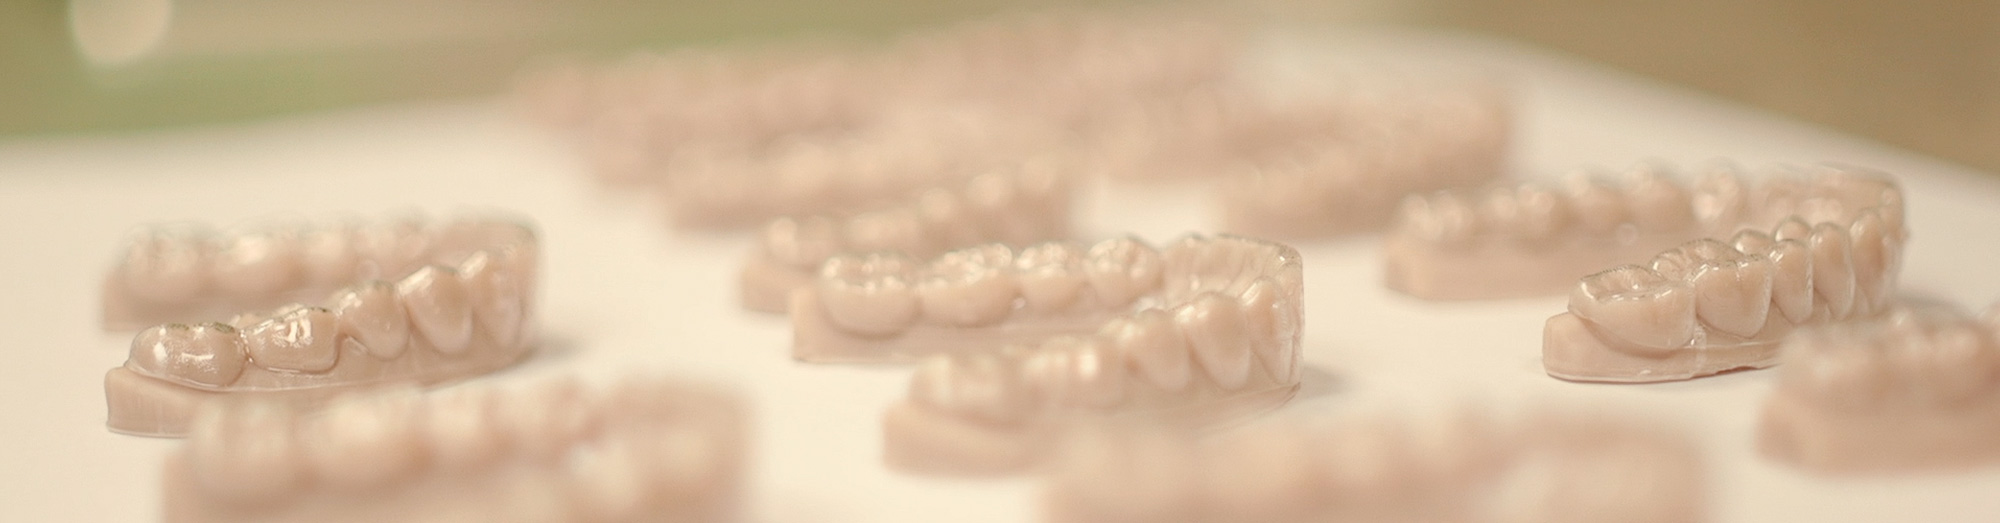 3d printing clear aligners